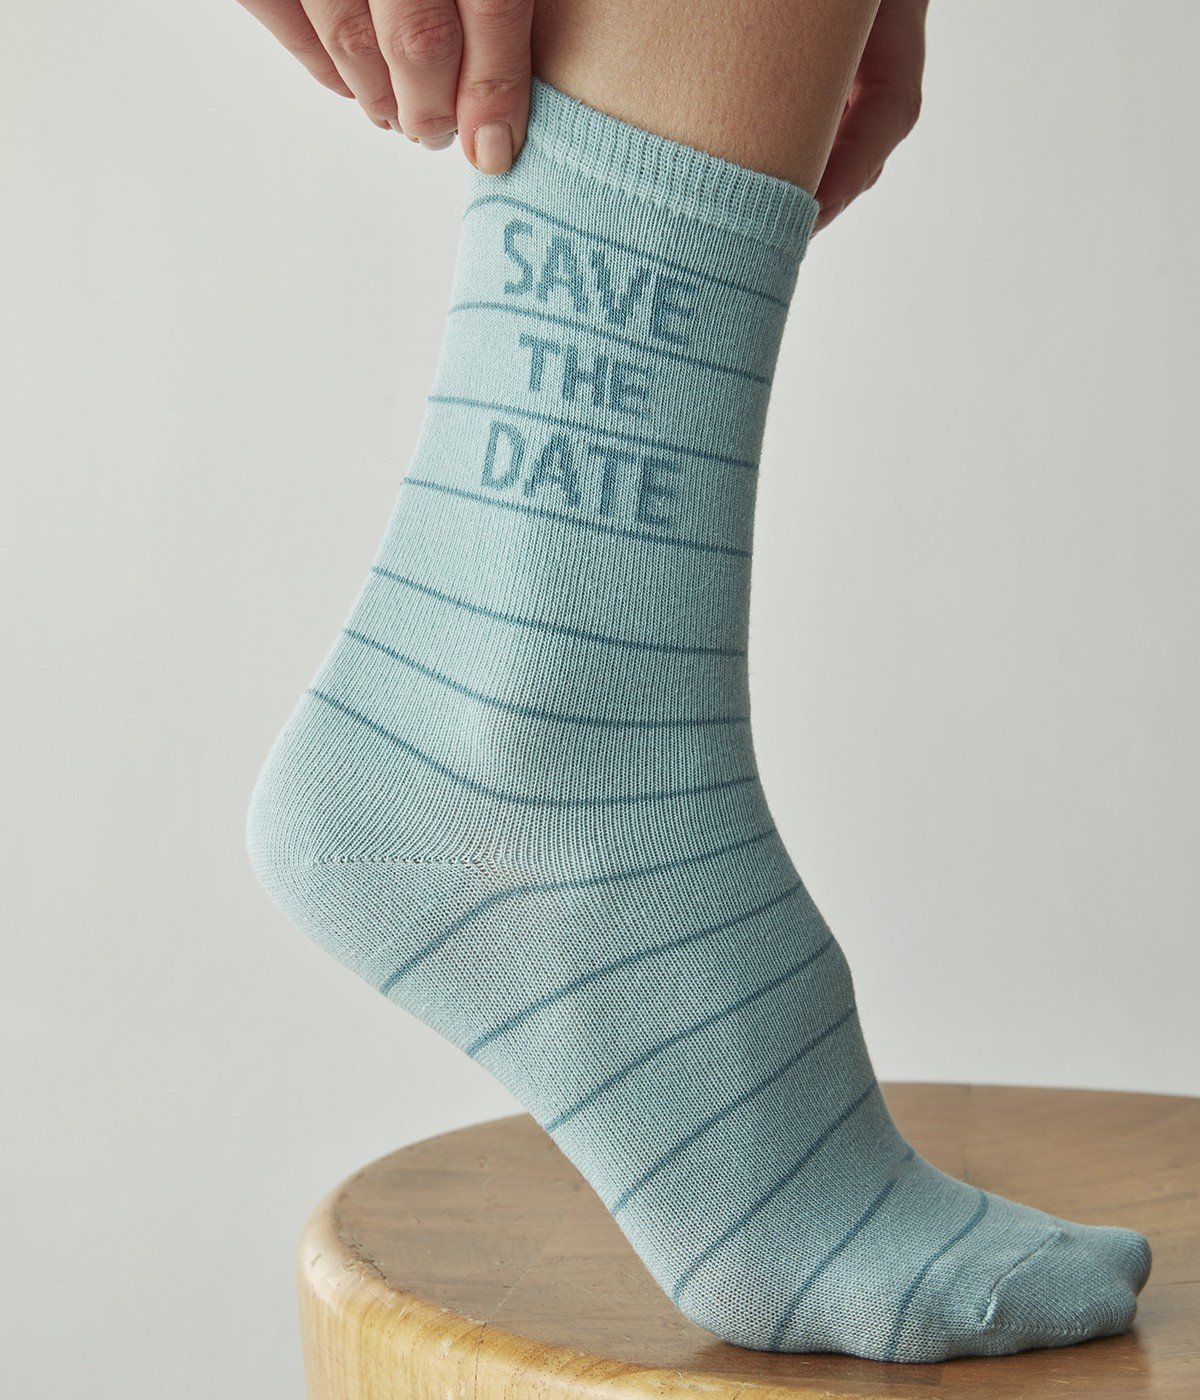 Save The Date 3in1 Socks